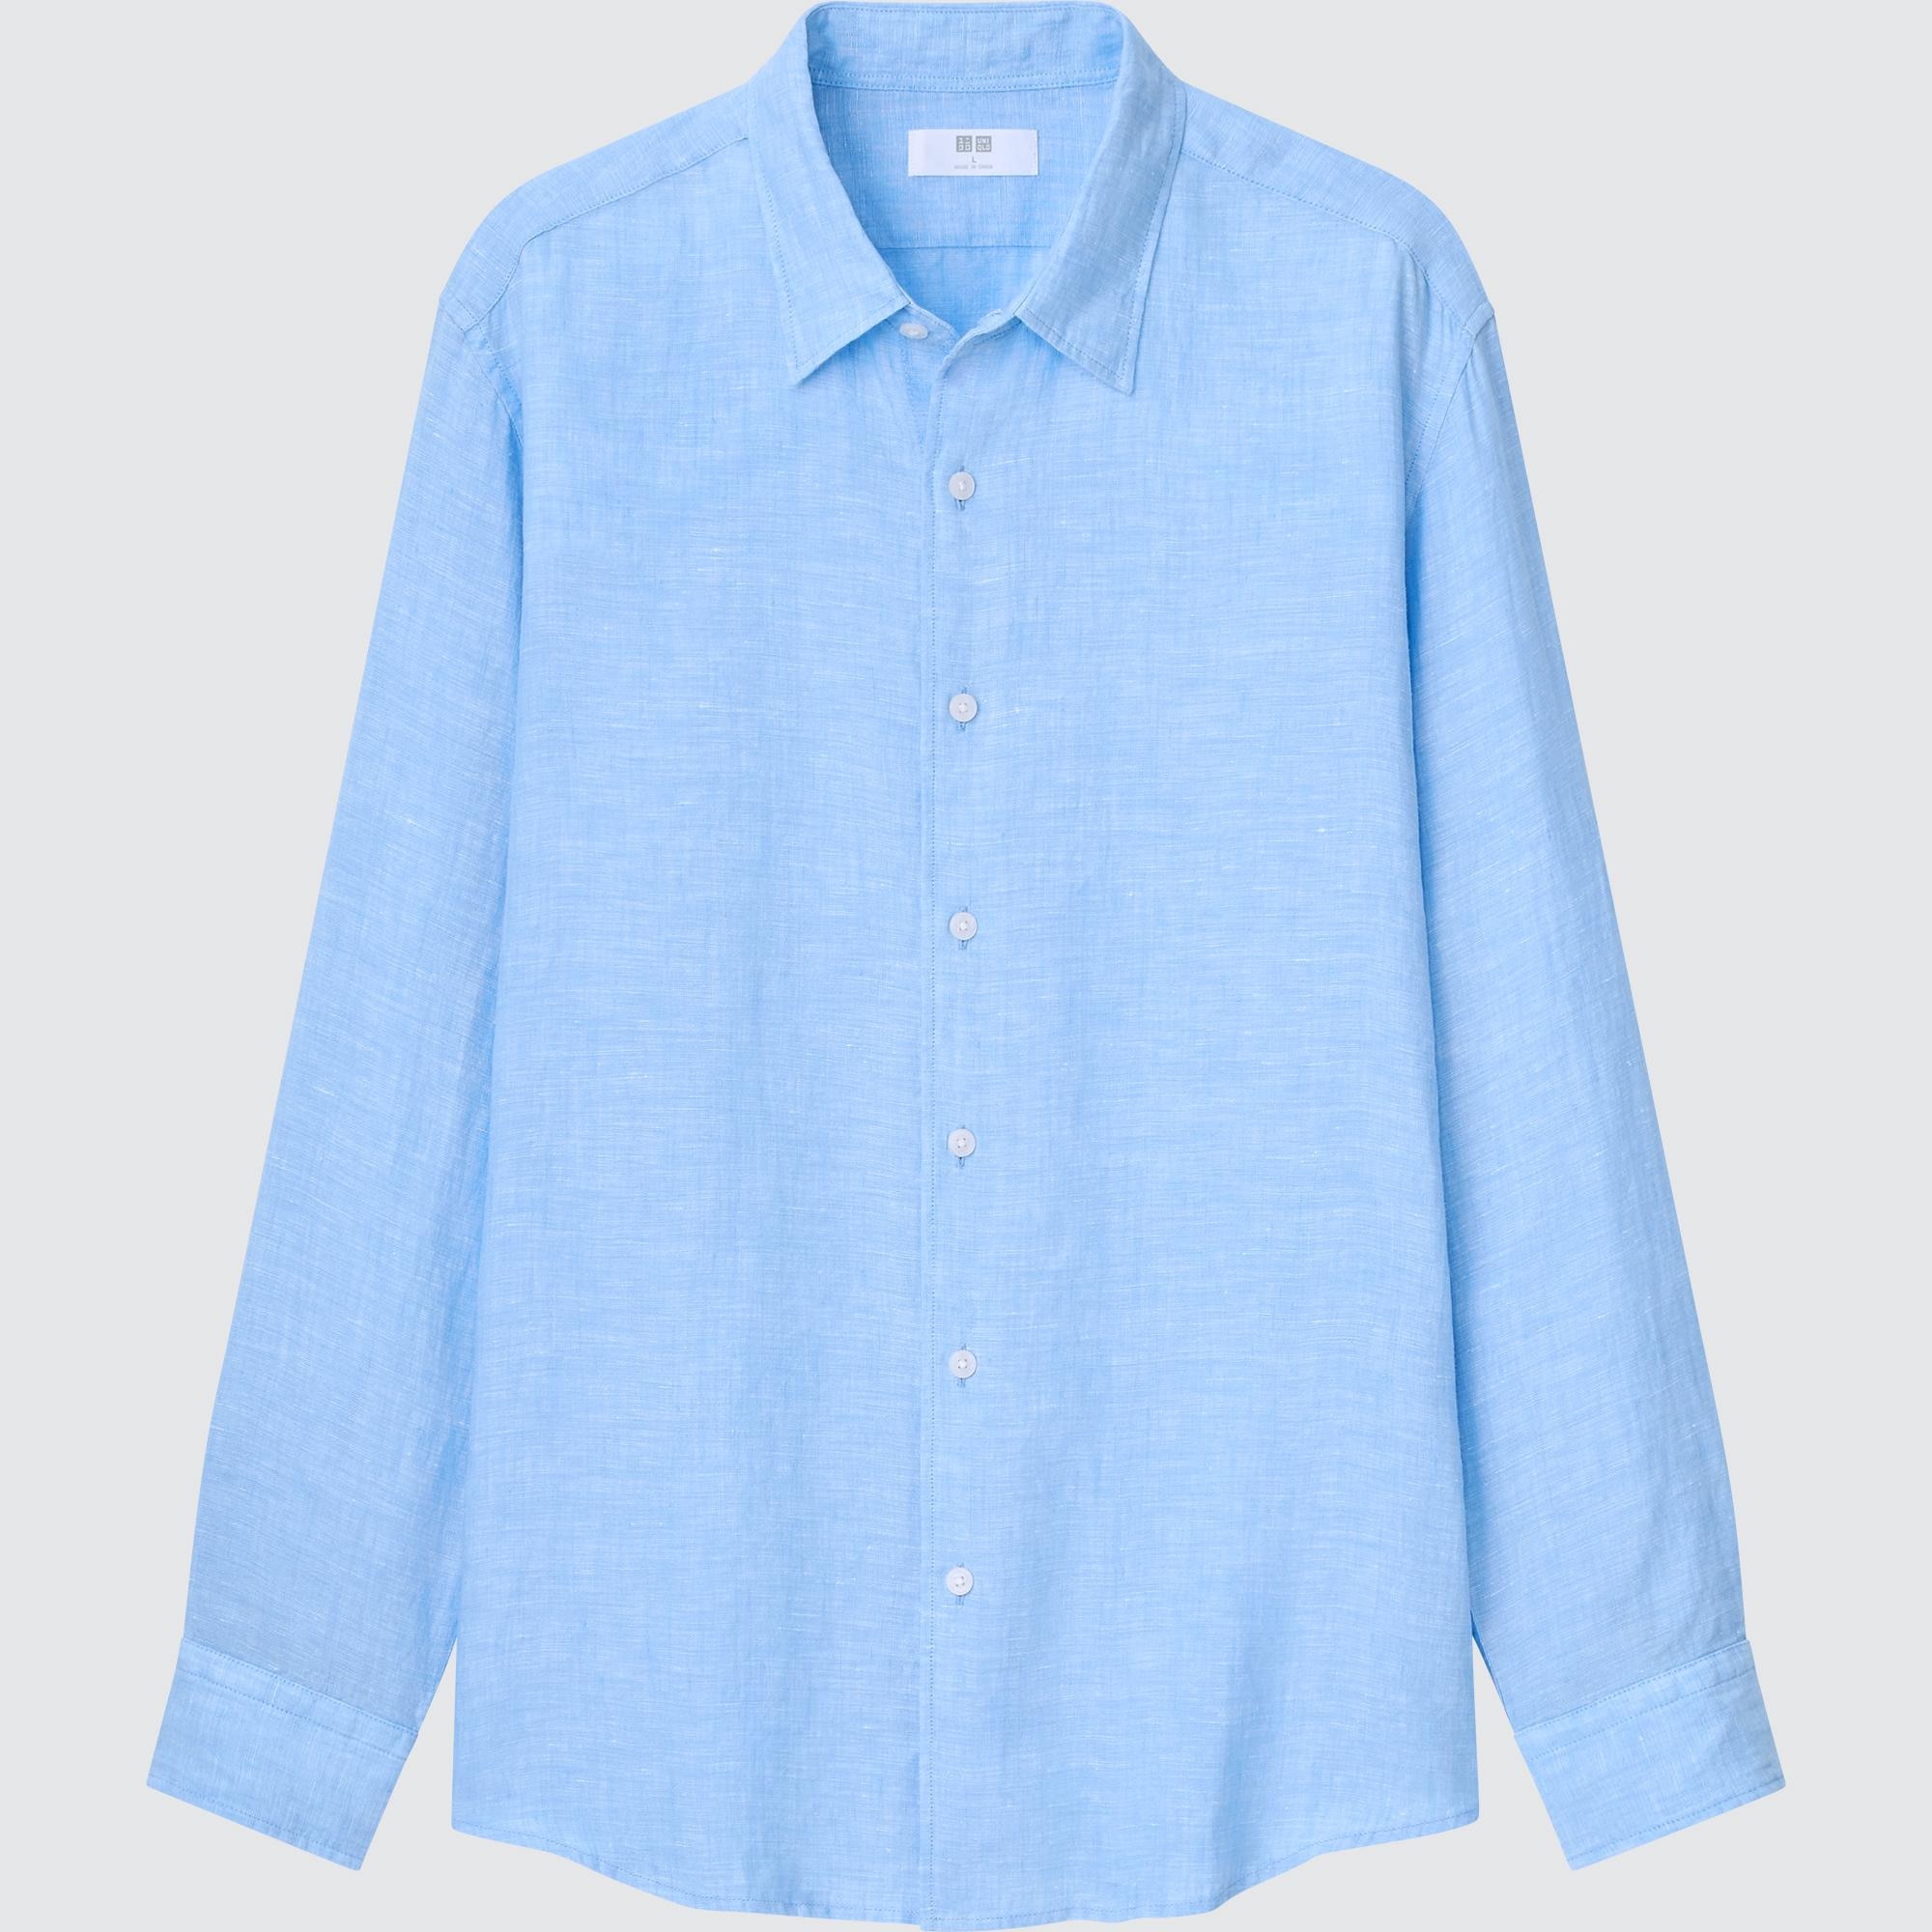 Uniqlo Dry Pique Short Sleeve Polo Shirt  Blue  Online Sneaker Store